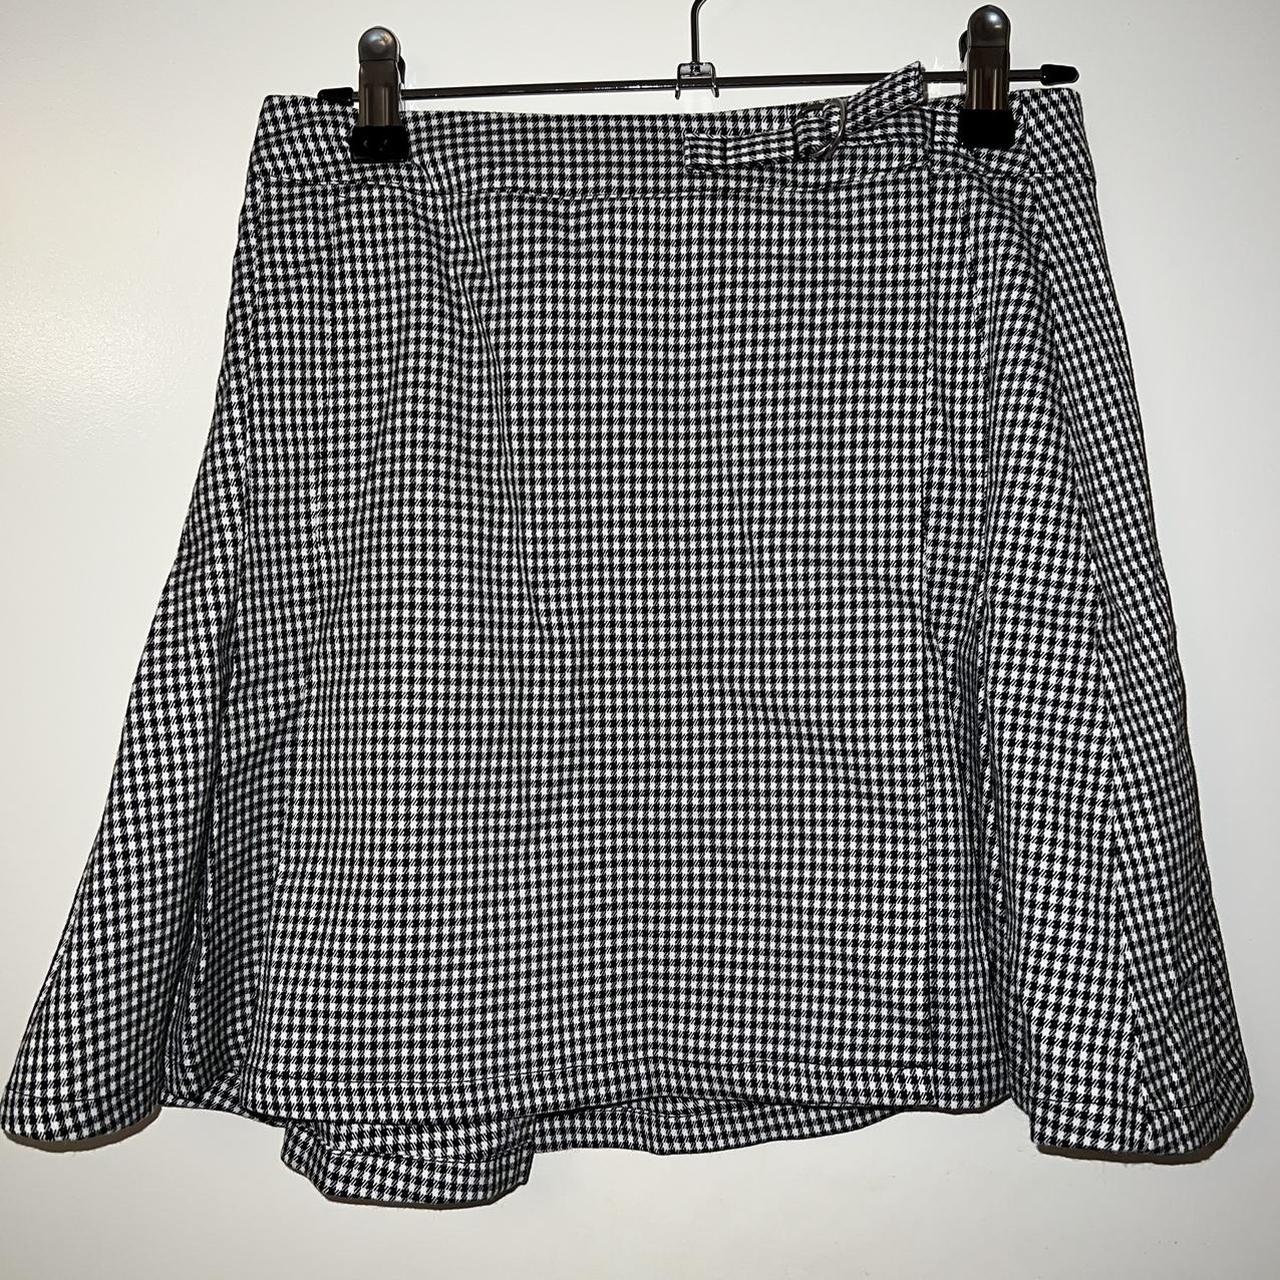 Glassons houndstooth pleated skirt - only worn once - Depop